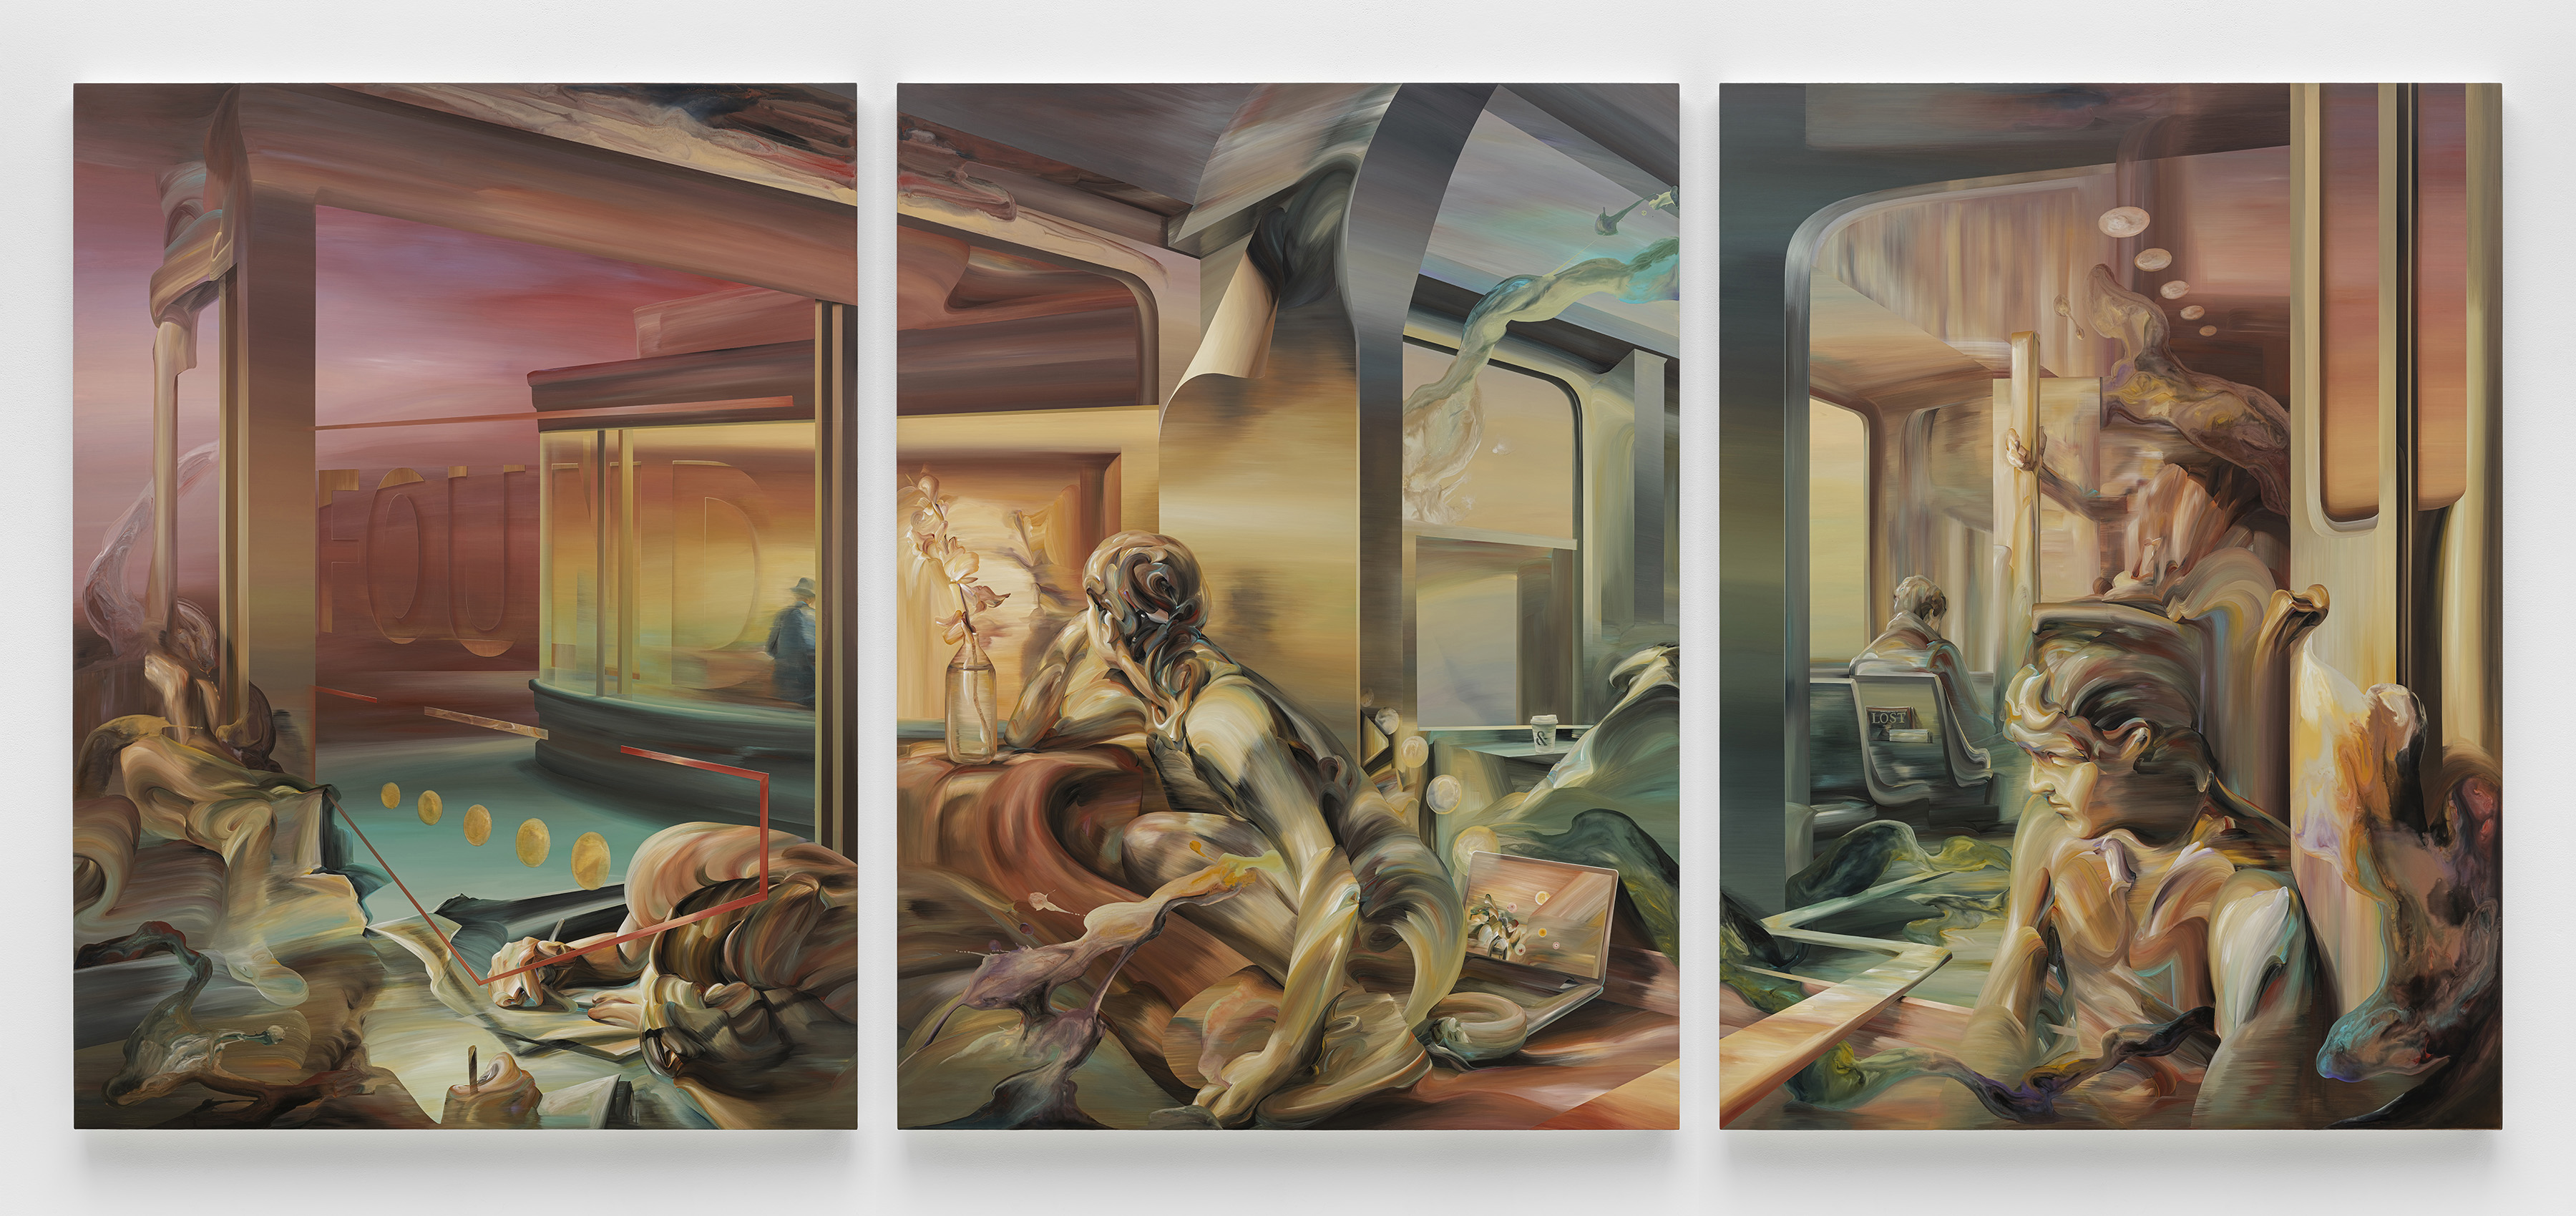 Huang Ko Wei, Lost & Found, 2023, acrylic on canvas, triptych, each: 160 x 120 cm (63 x 47 1/4 in); overall: 160 x 360 cm (63 x 141 3/4 in).